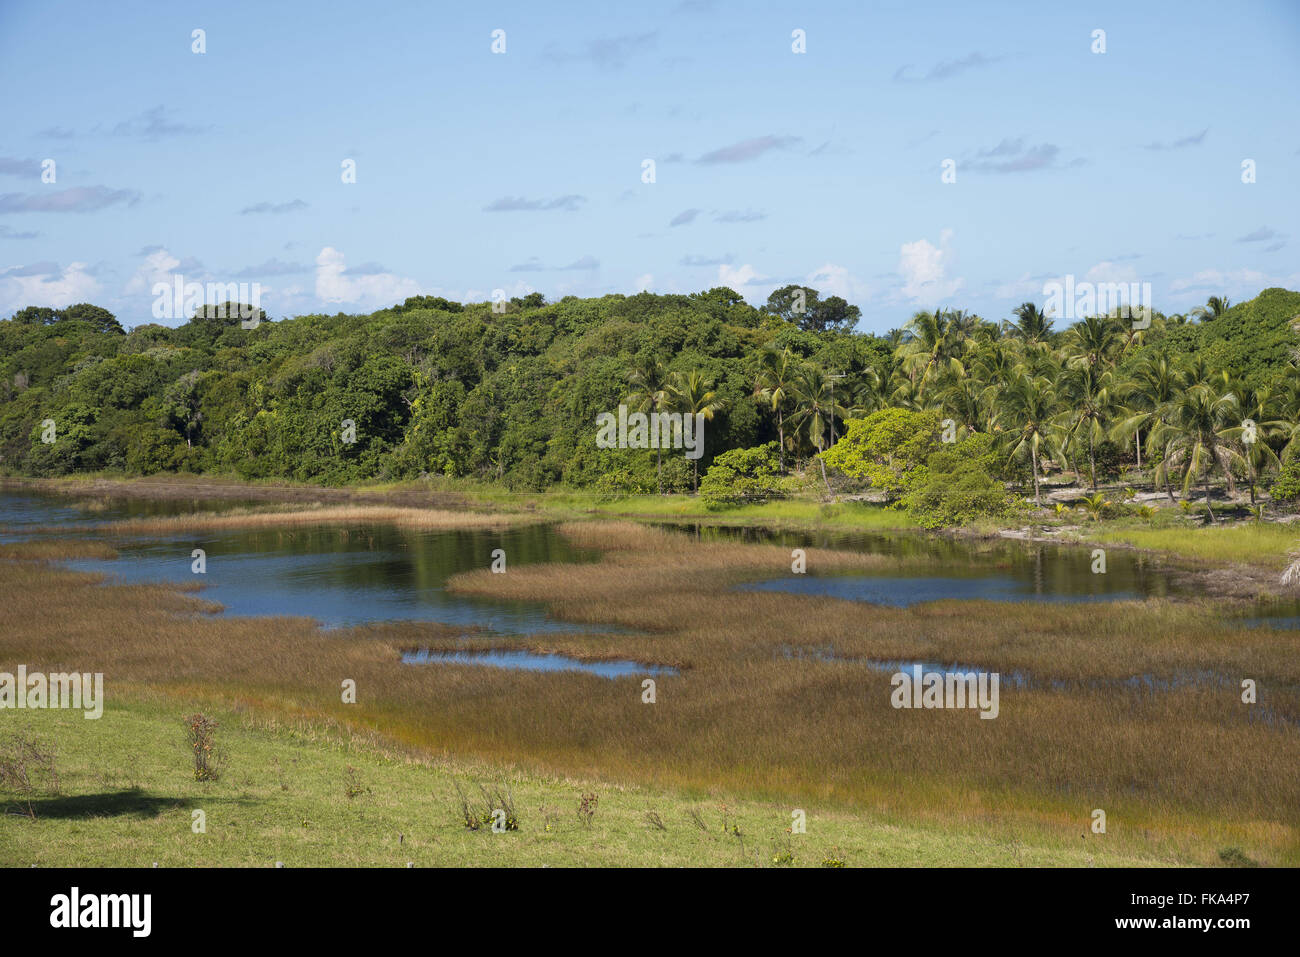 Pond Cassange - freshwater lagoon separated from the ocean by small strip of sand Stock Photo